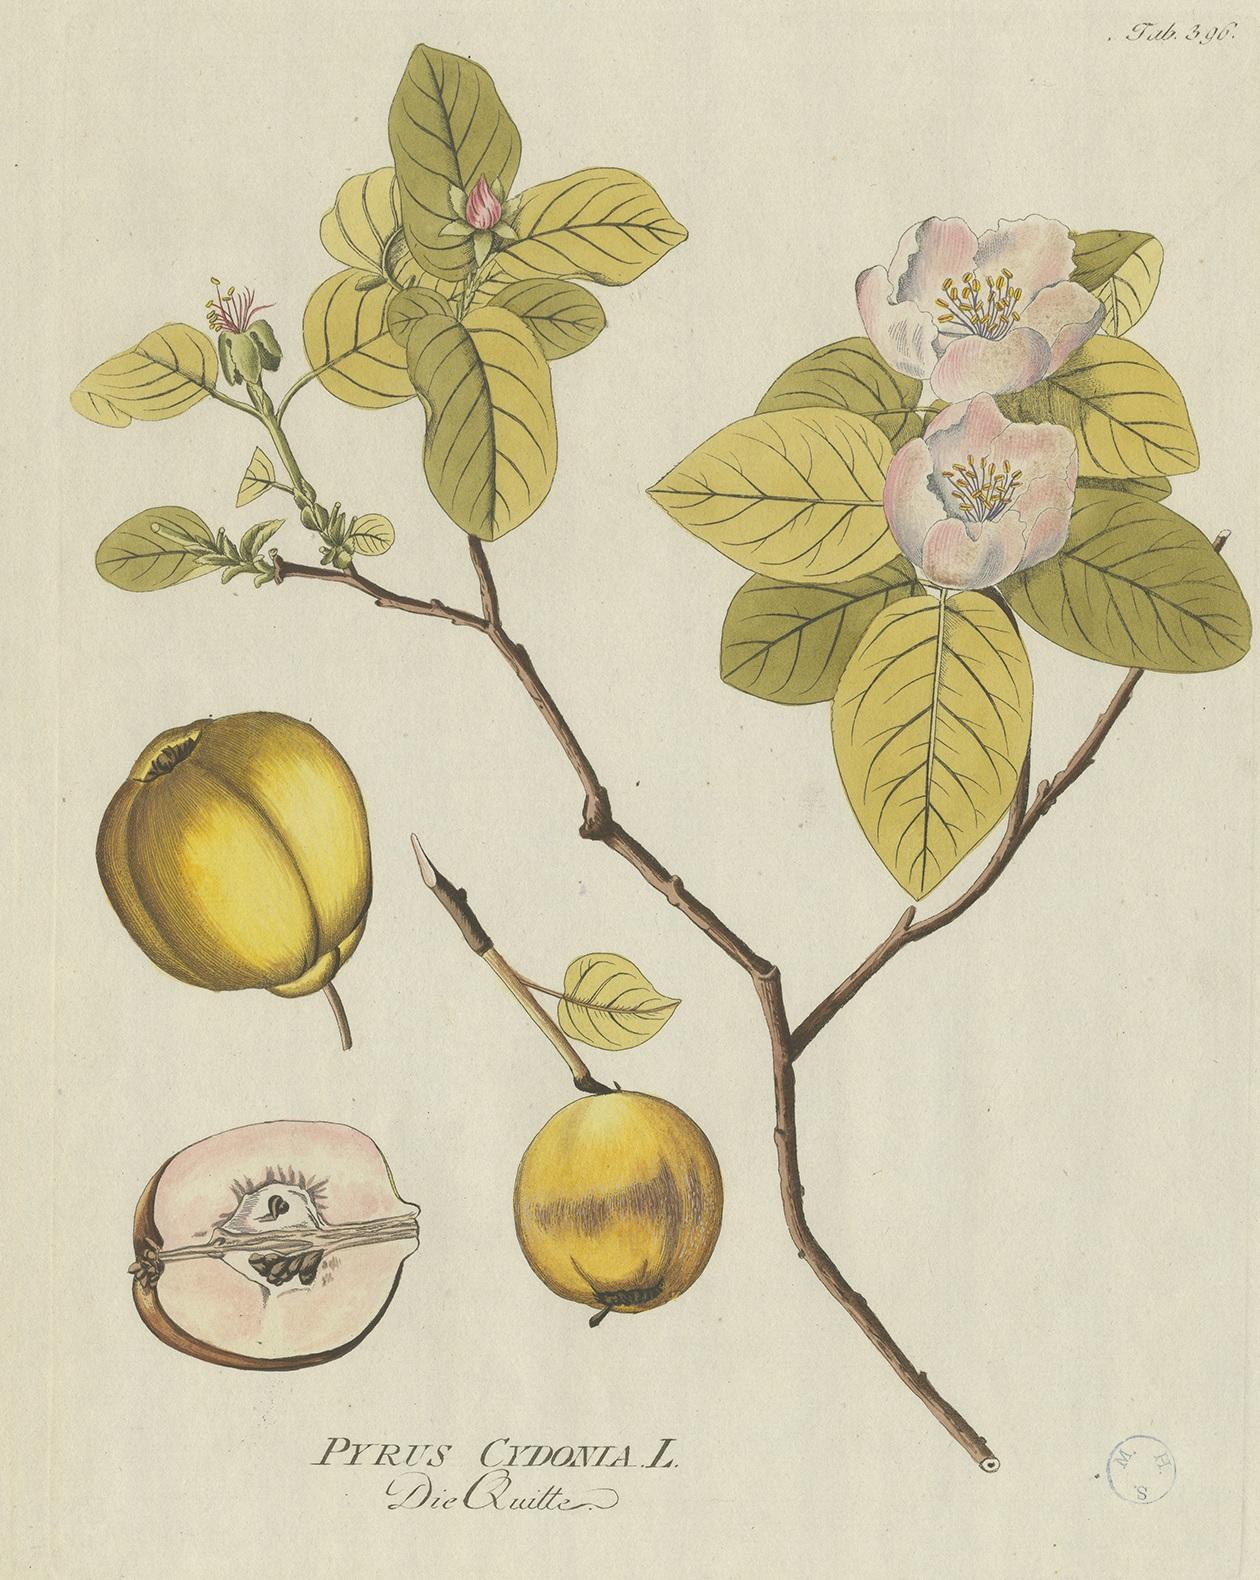 Antique botany print titled 'Pyrus Cydonia'. Hand colored engraving of a quince tree. This print originates from 'Icones Plantarum Medicinalium (..)' by Joseph Jacob Plenck. Published between 1788 and 1803.